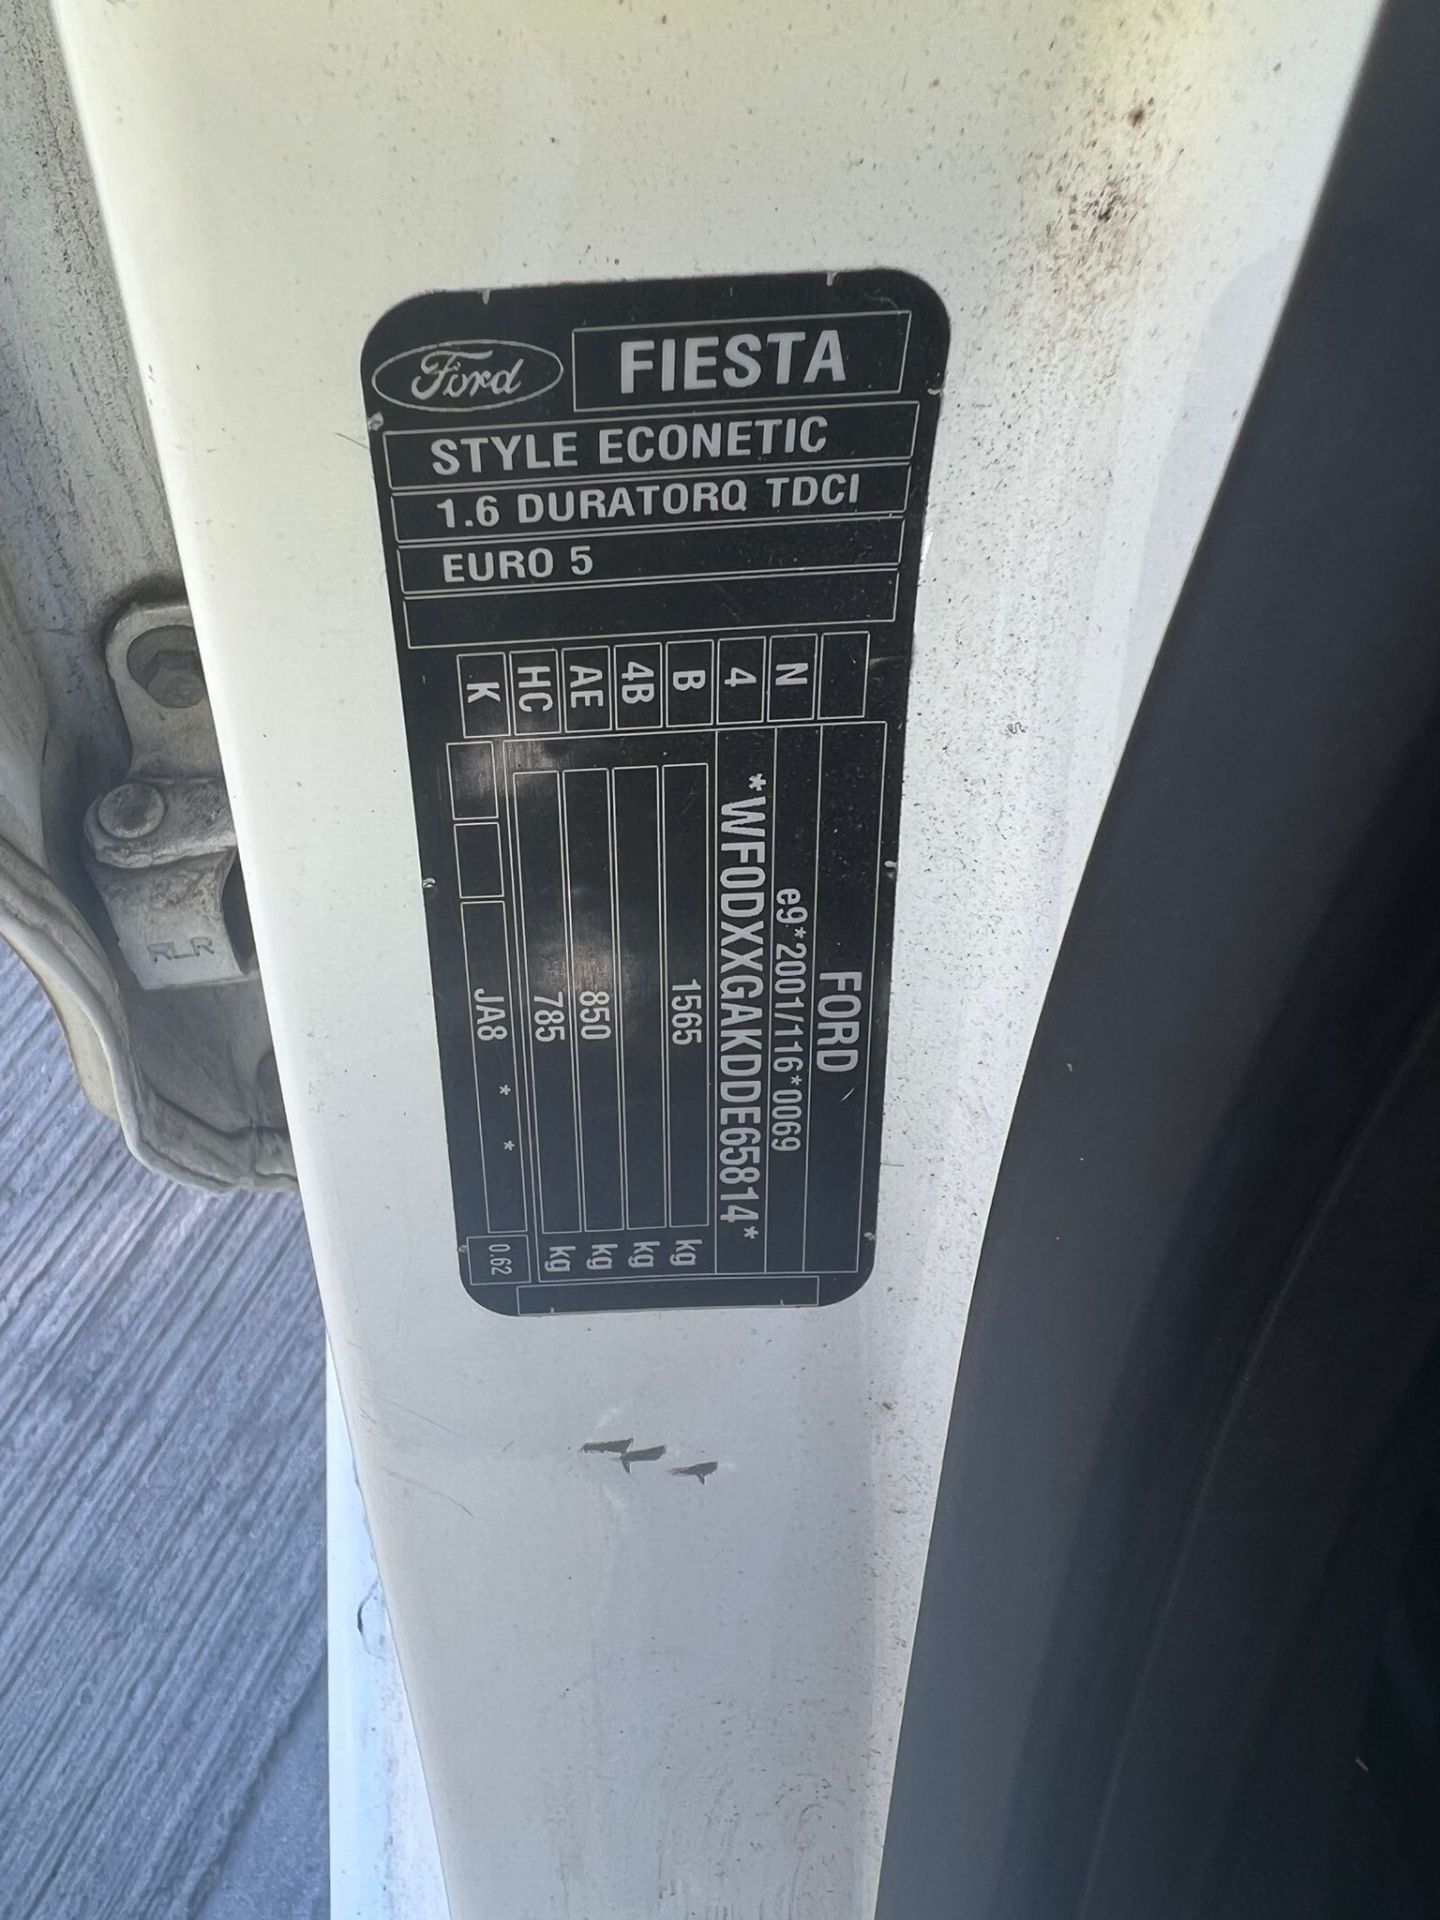 Ford Fiesta Style Econetic 2014 - Image 21 of 28